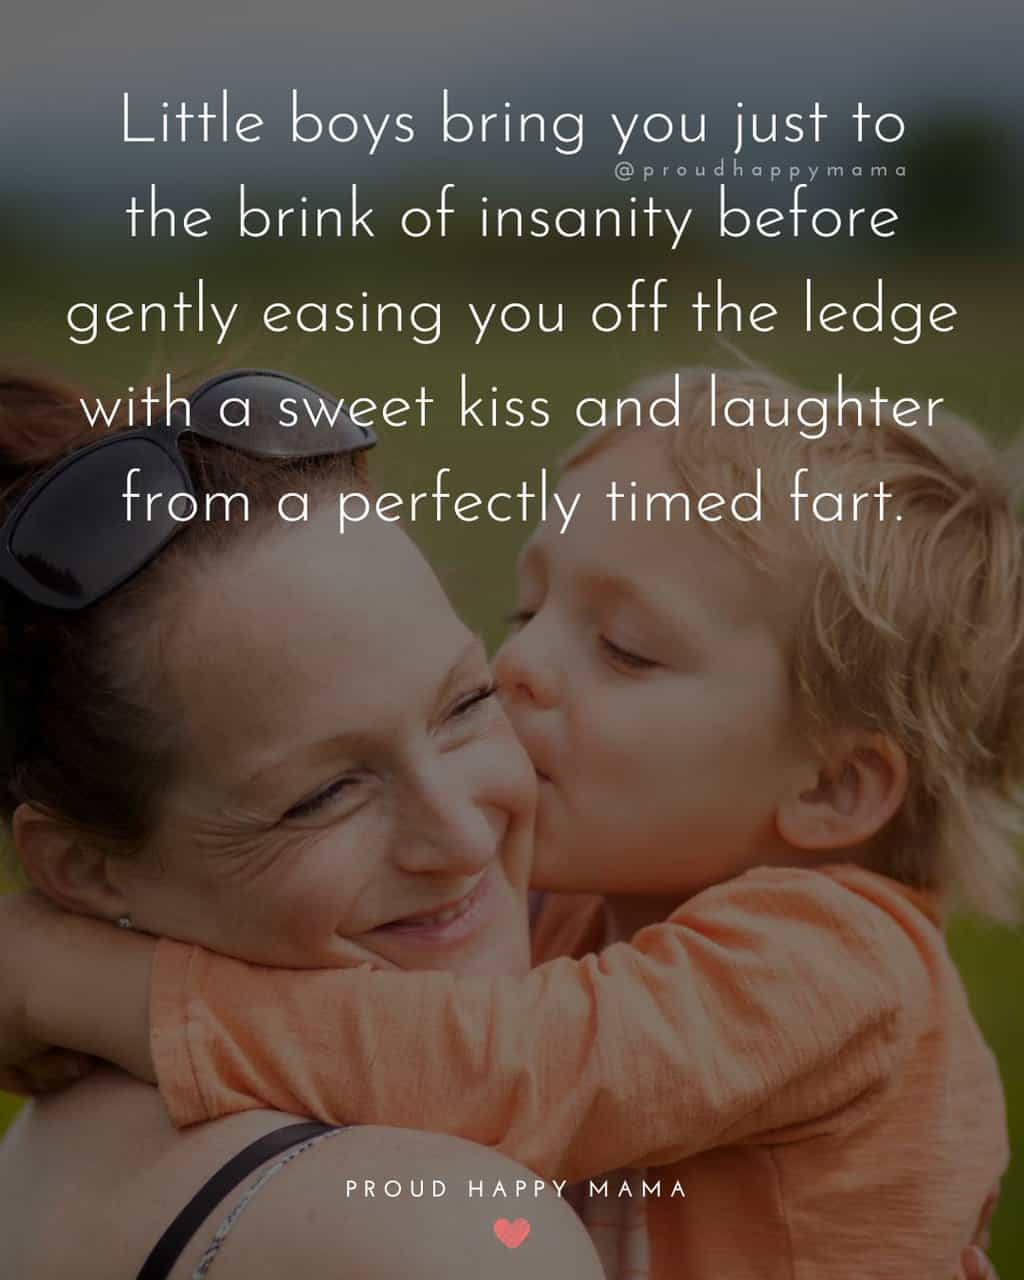 Funny little boy quotes - 39. ‘Little boys bring you to the brink of insanity before gently easing you off the ledge with a sweet kiss and laughter from a perfectly timed fart.’